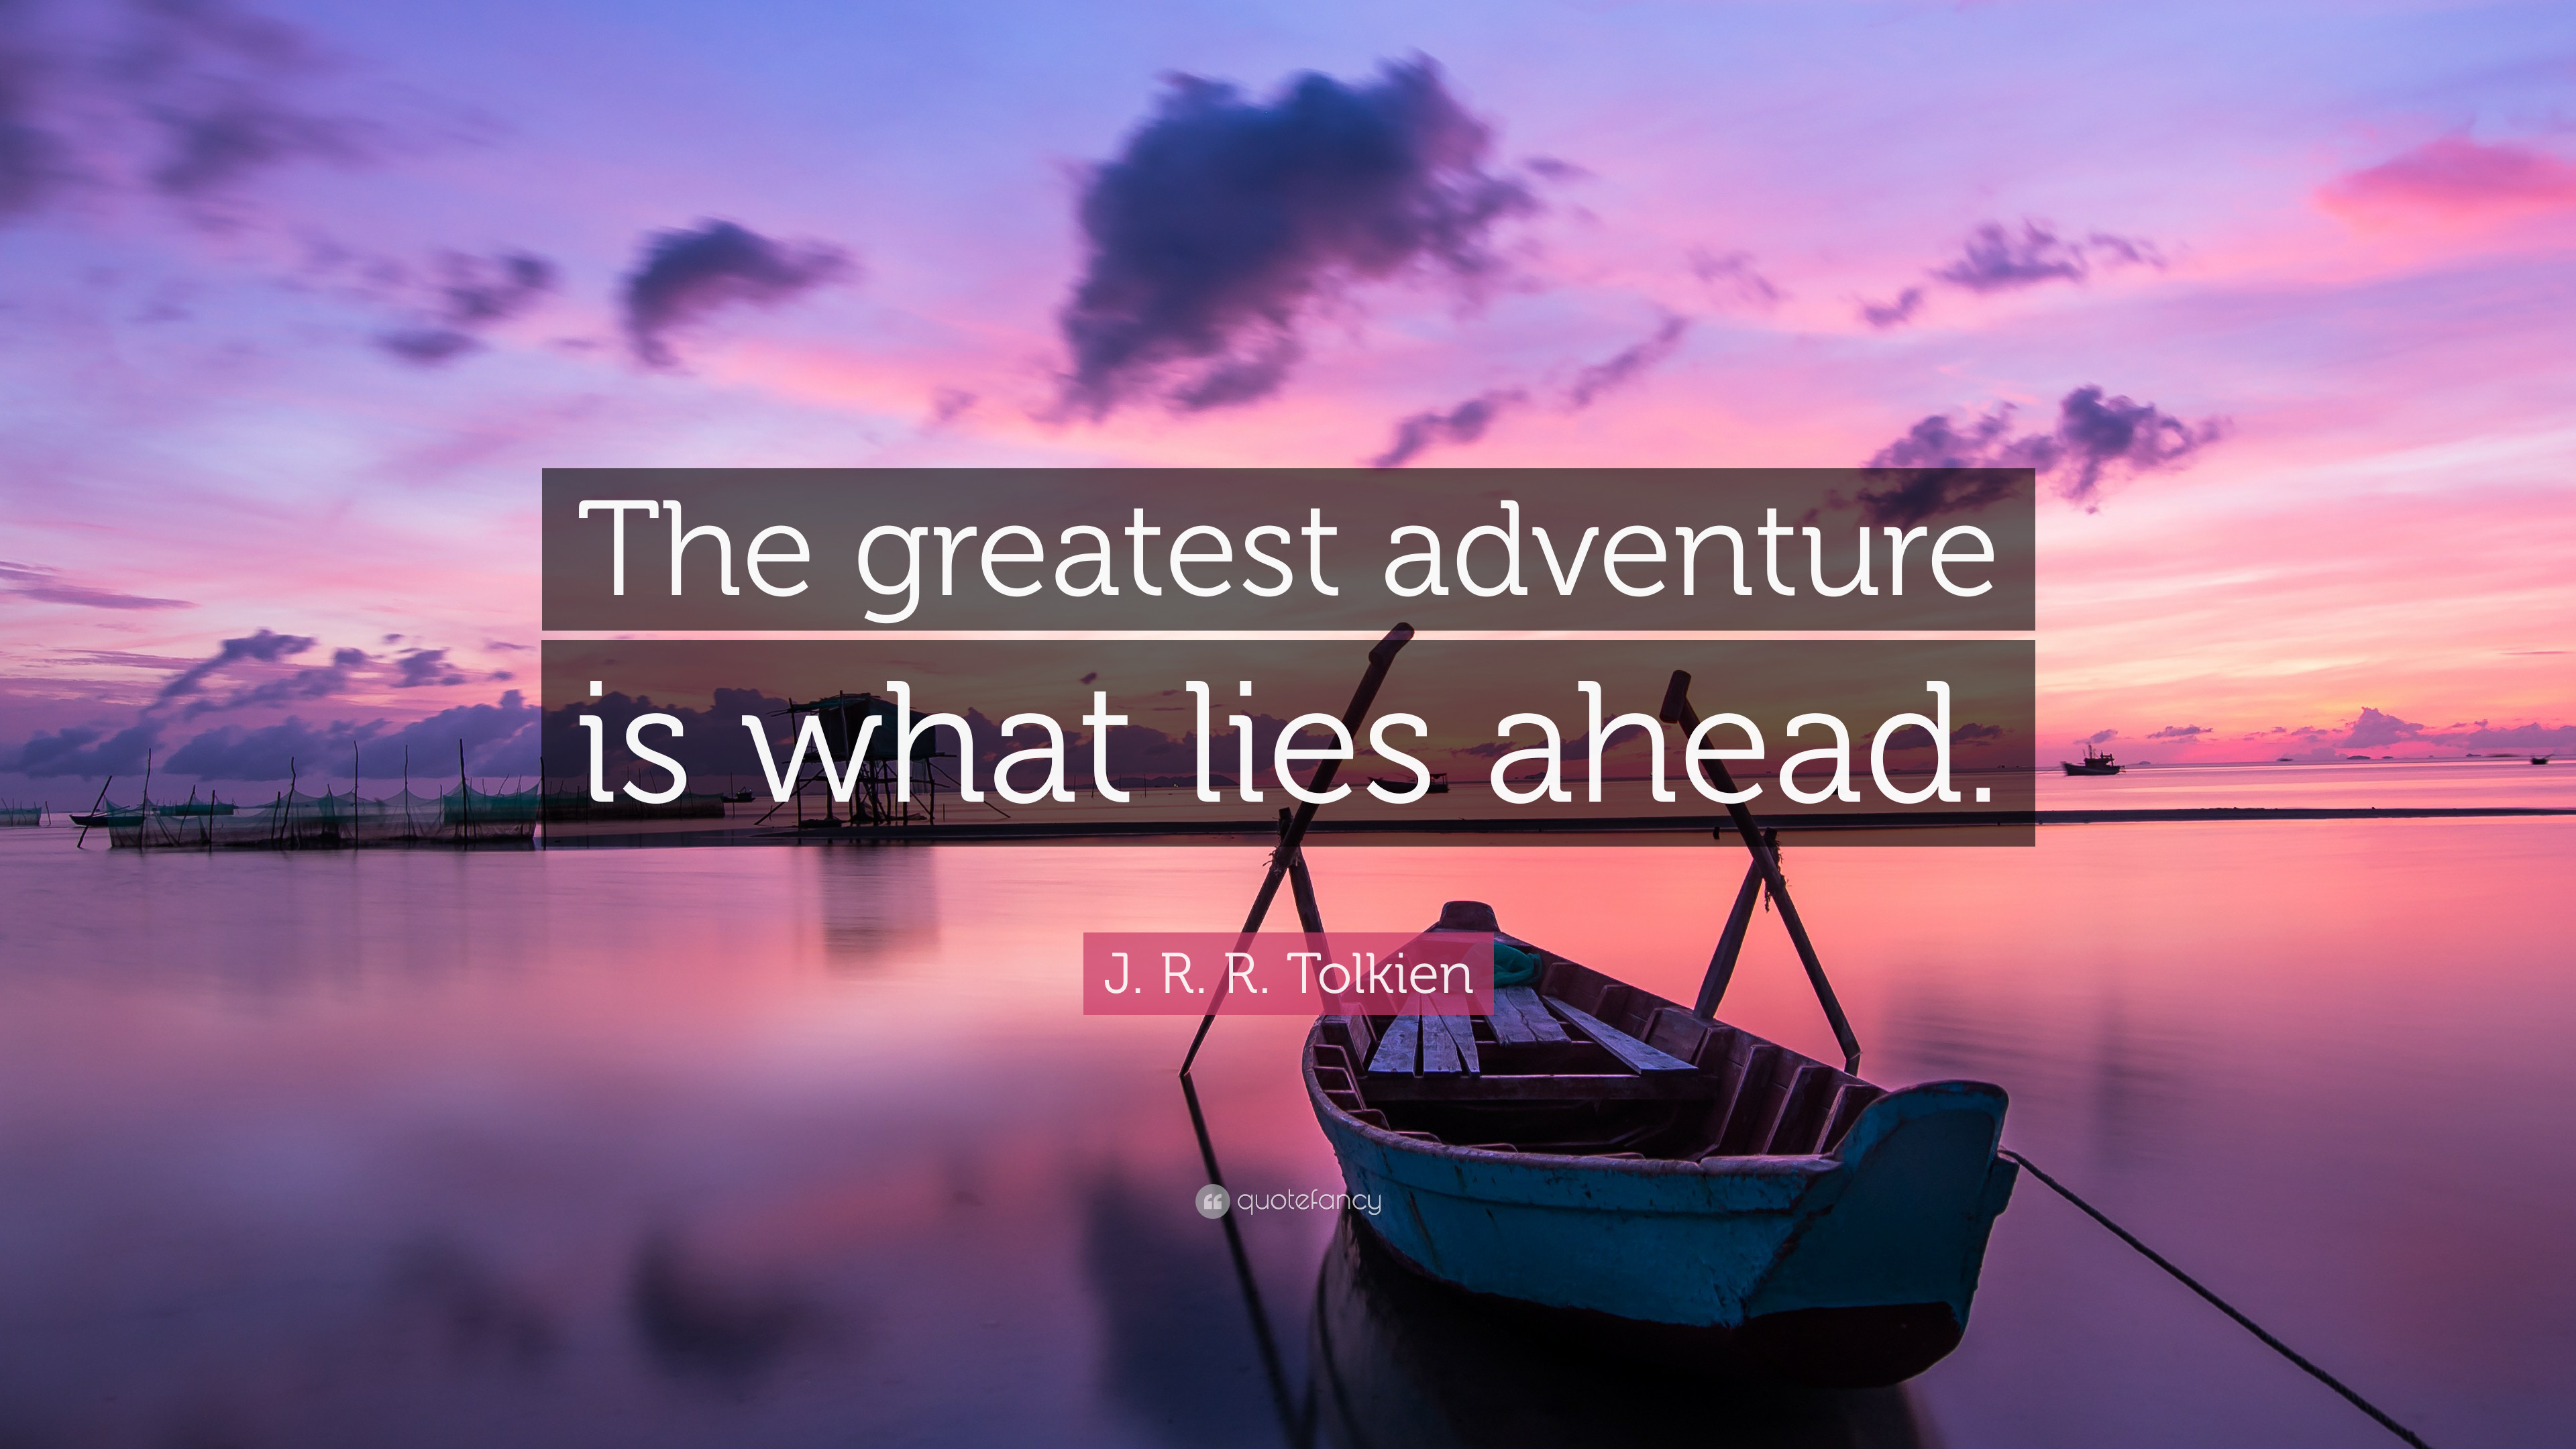 3840x2160 Adventure Quotes: “The greatest adventure is what lies ahead.” — J. R. R.  Tolkien